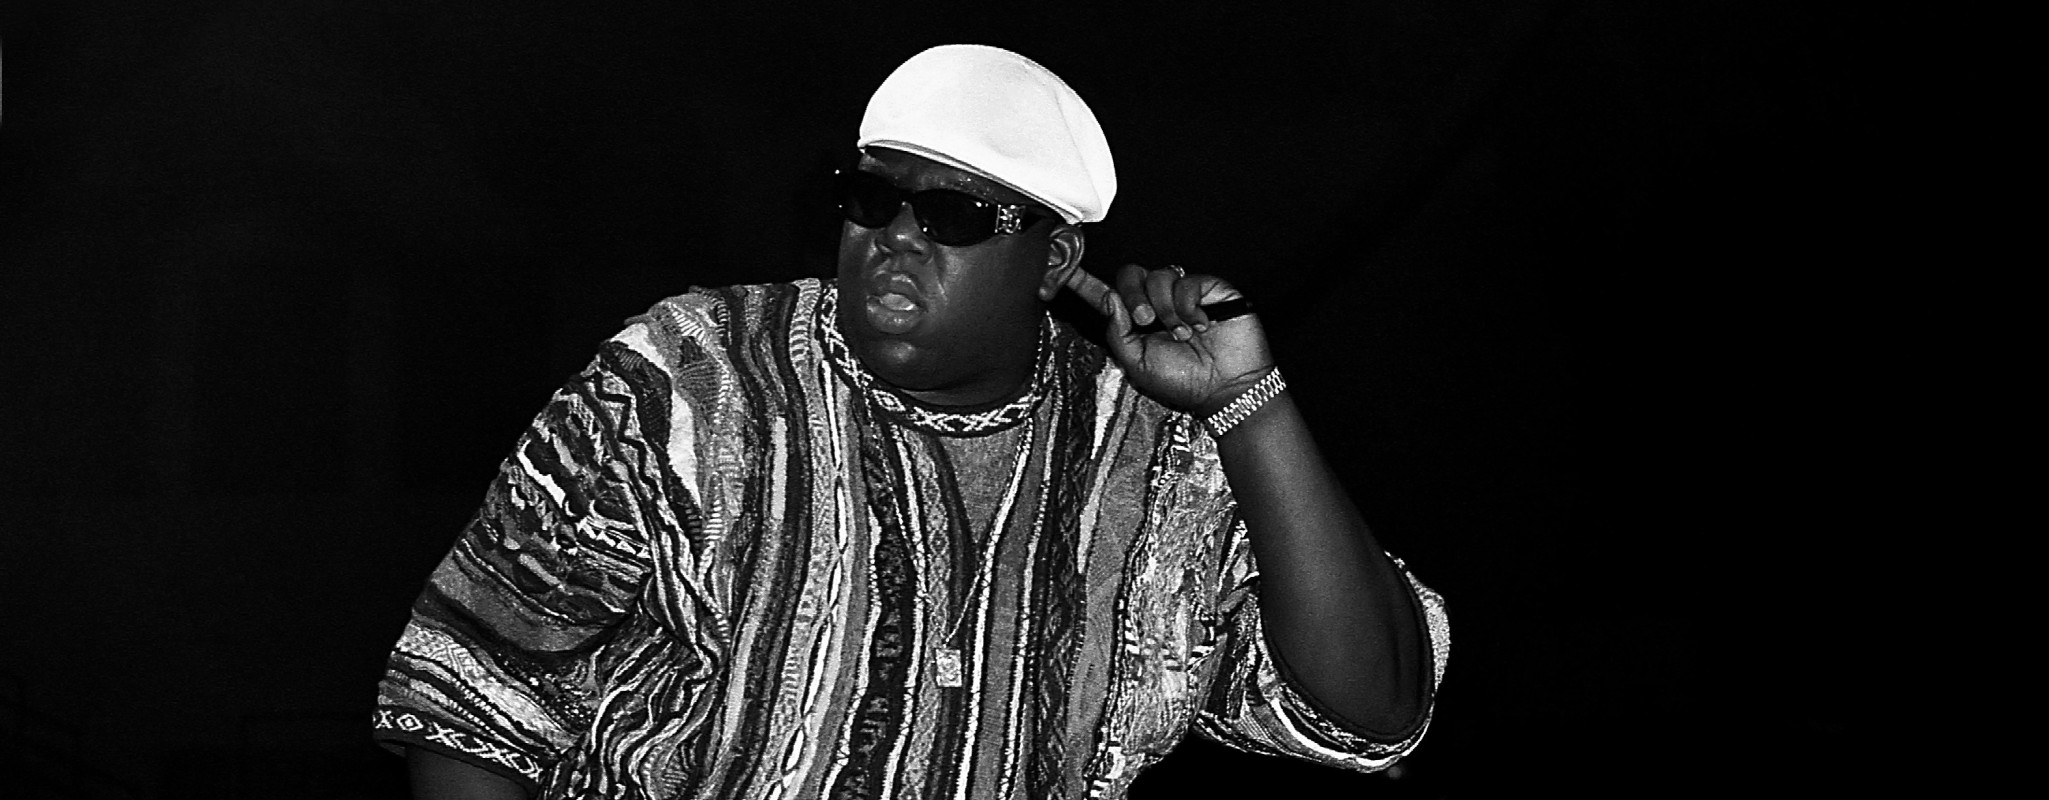 Notorious B.I.G. Documentary In the Works